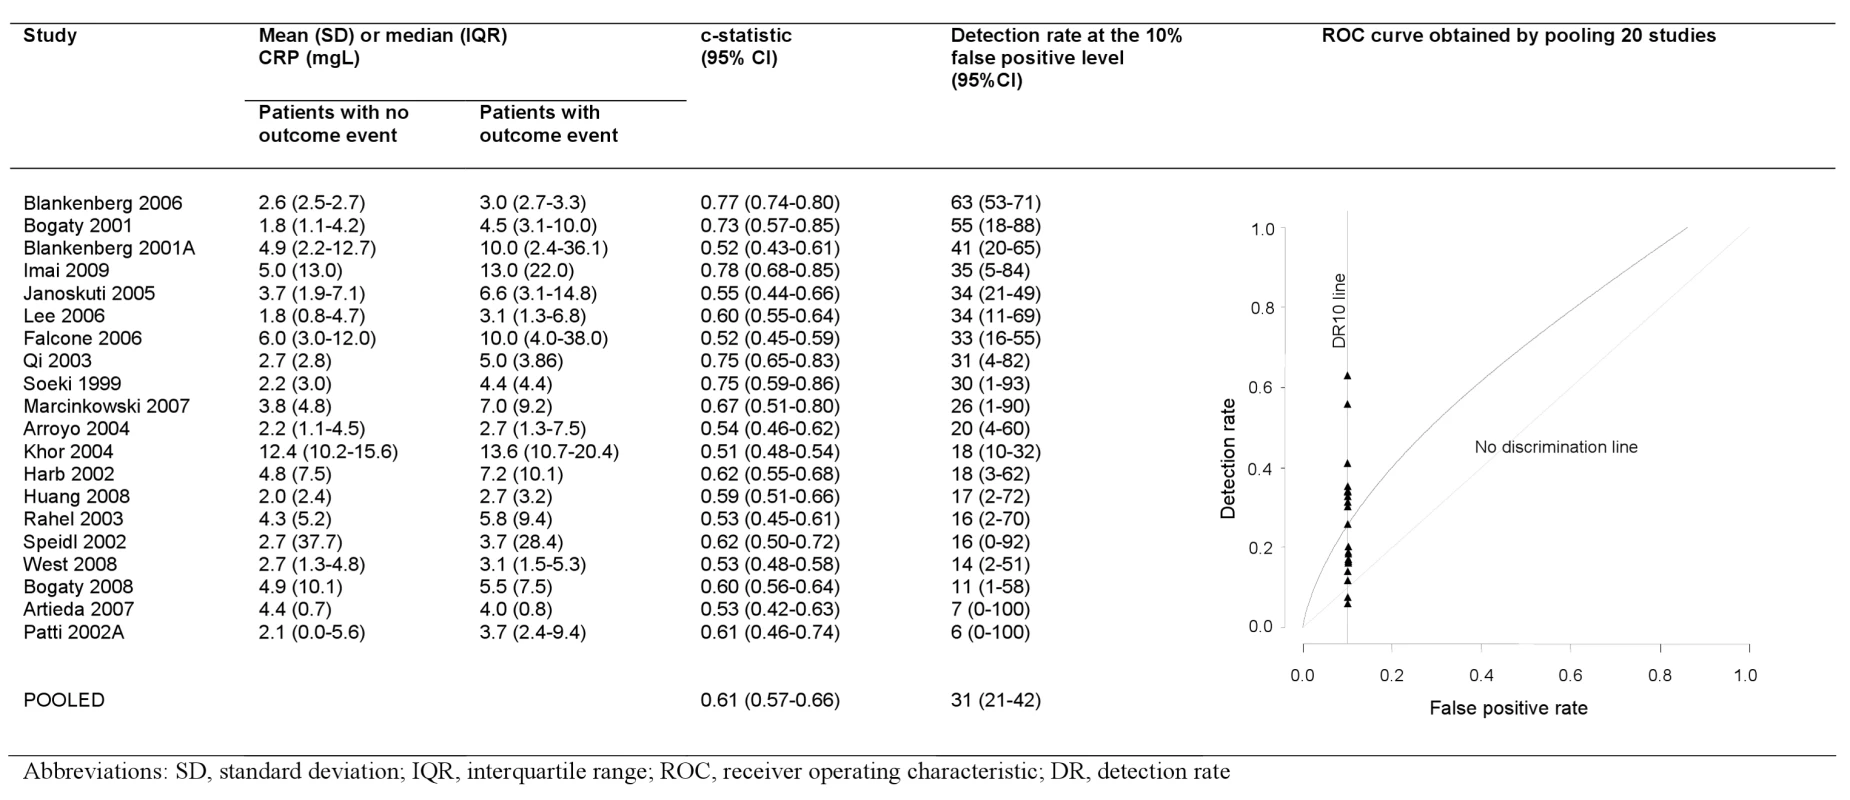 Detection rates at 10% false positive rate and c-statistic for individual studies, and pooled ROC curve.